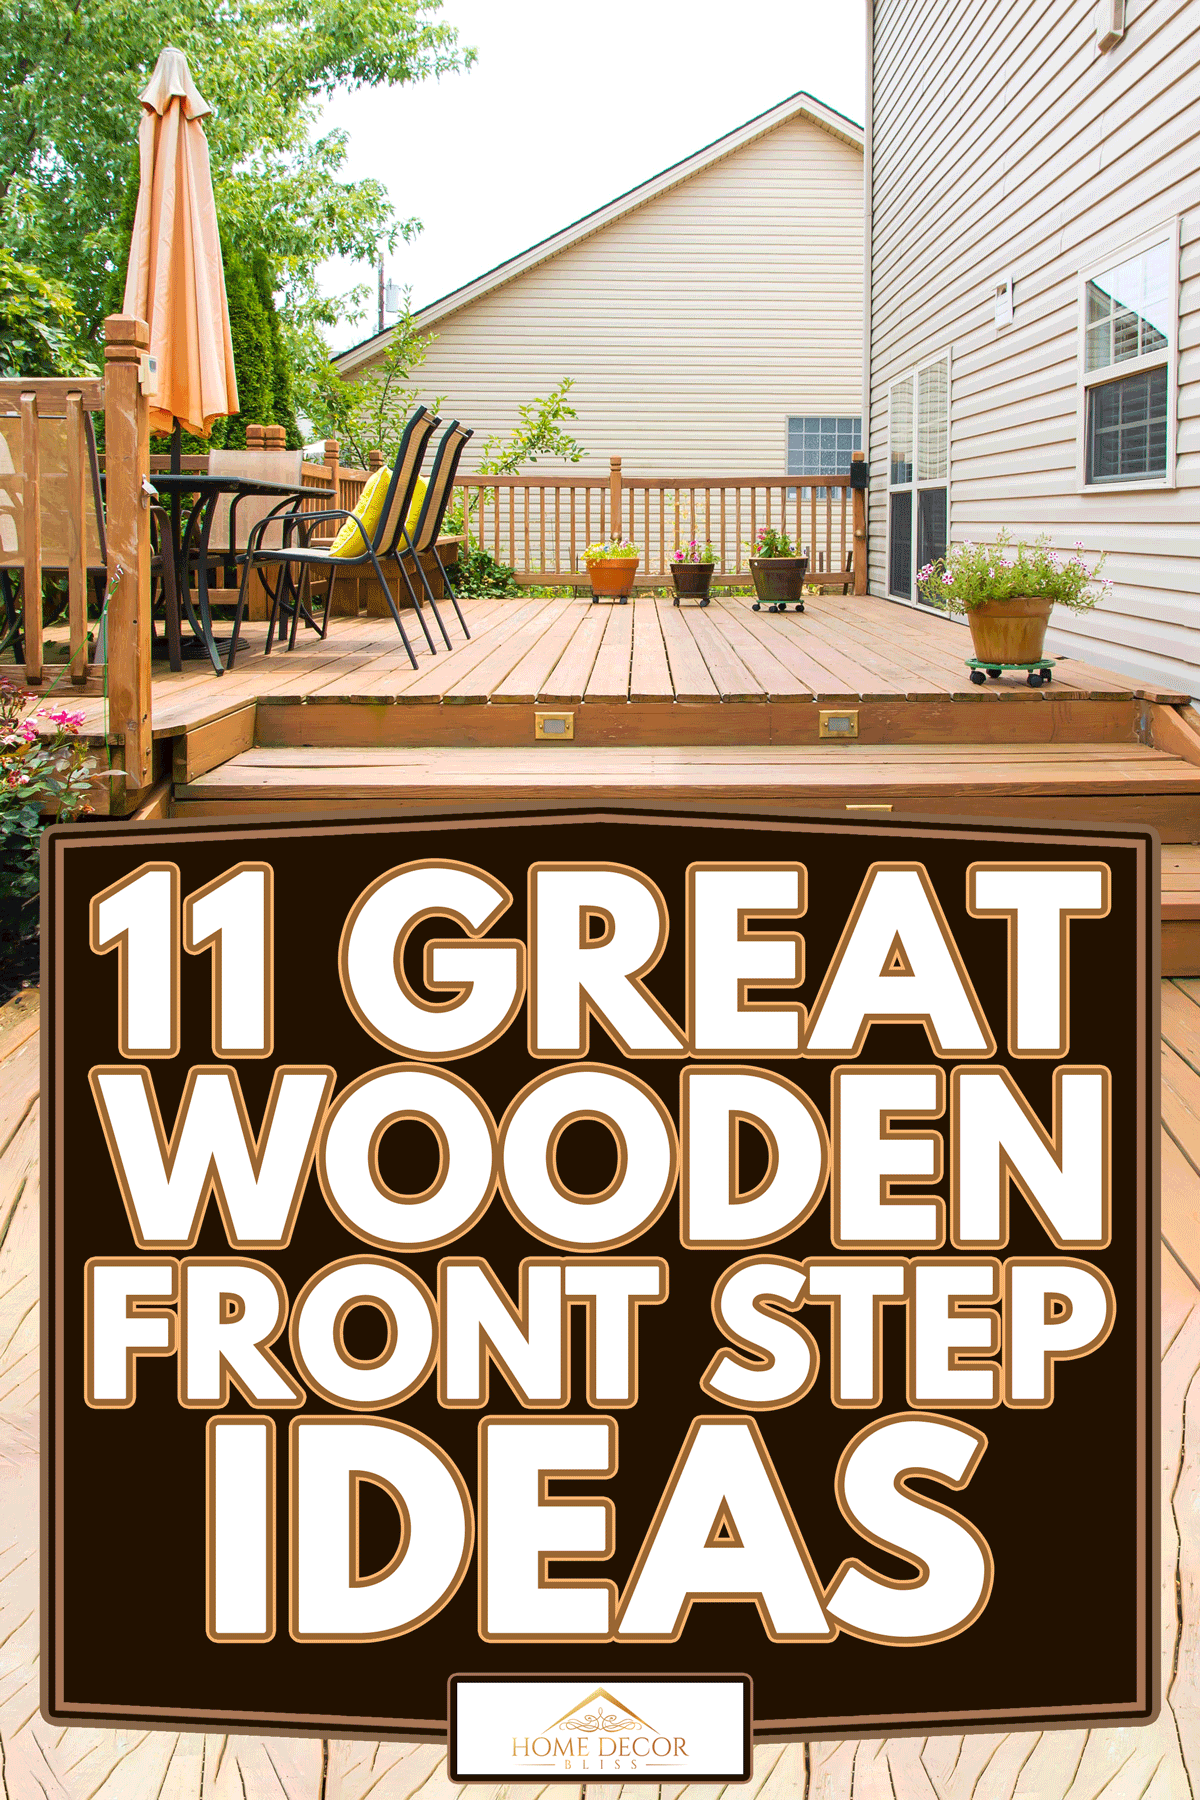 A wooden patio and garden area of a family house, 11 Great Wooden Front Step Ideas